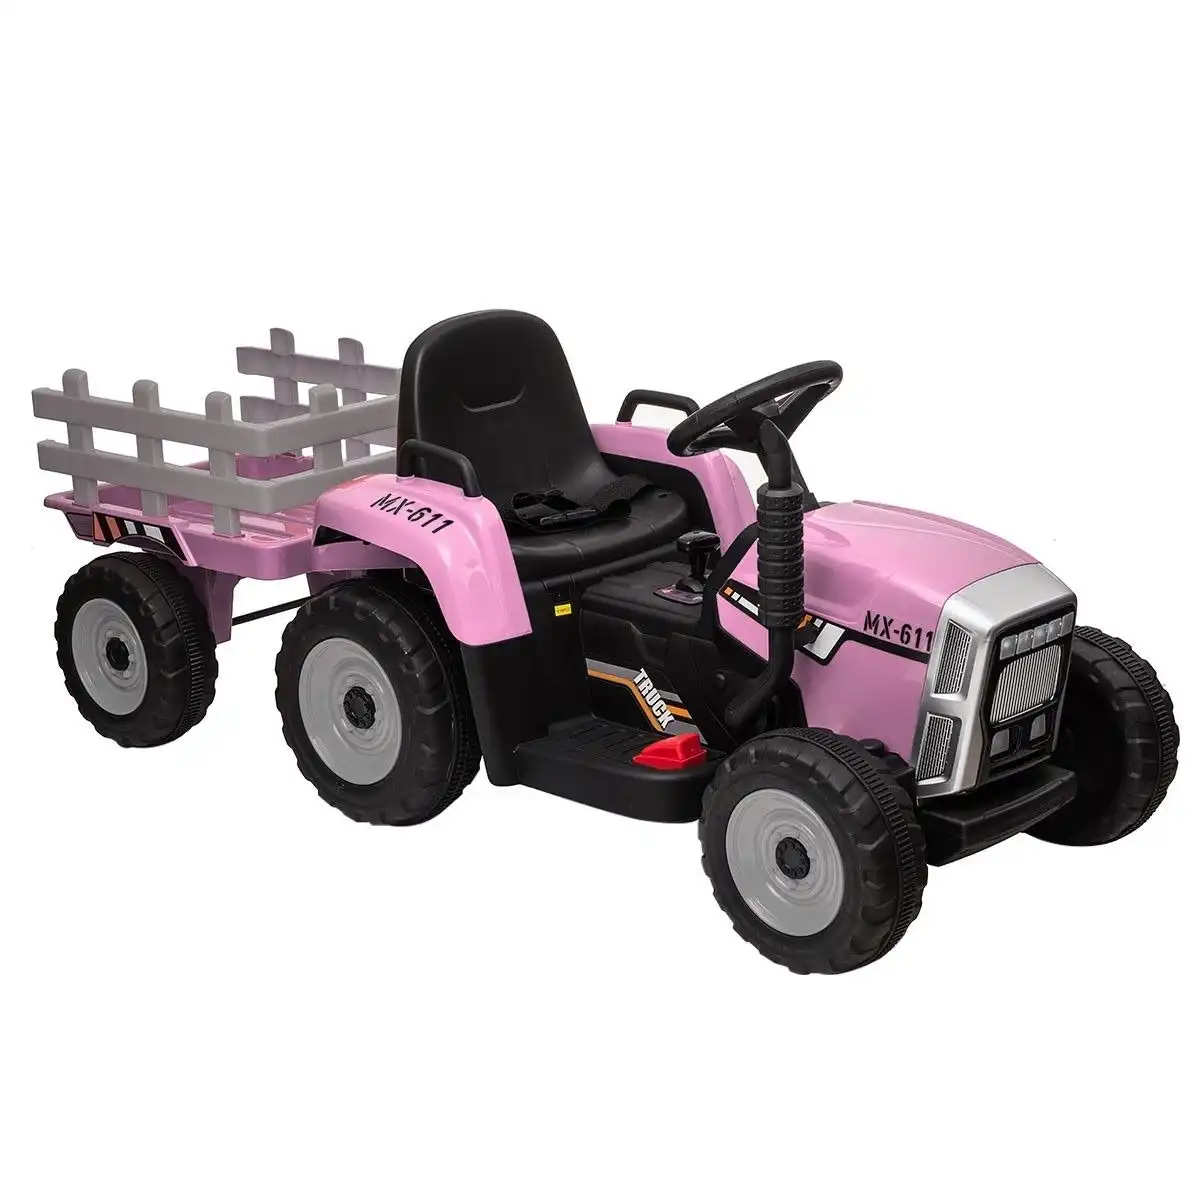 Ausway Kids Farm Tractor Electric Ride On Toys 2.4G R/C Remote Control Cars w/ Trailer Pink